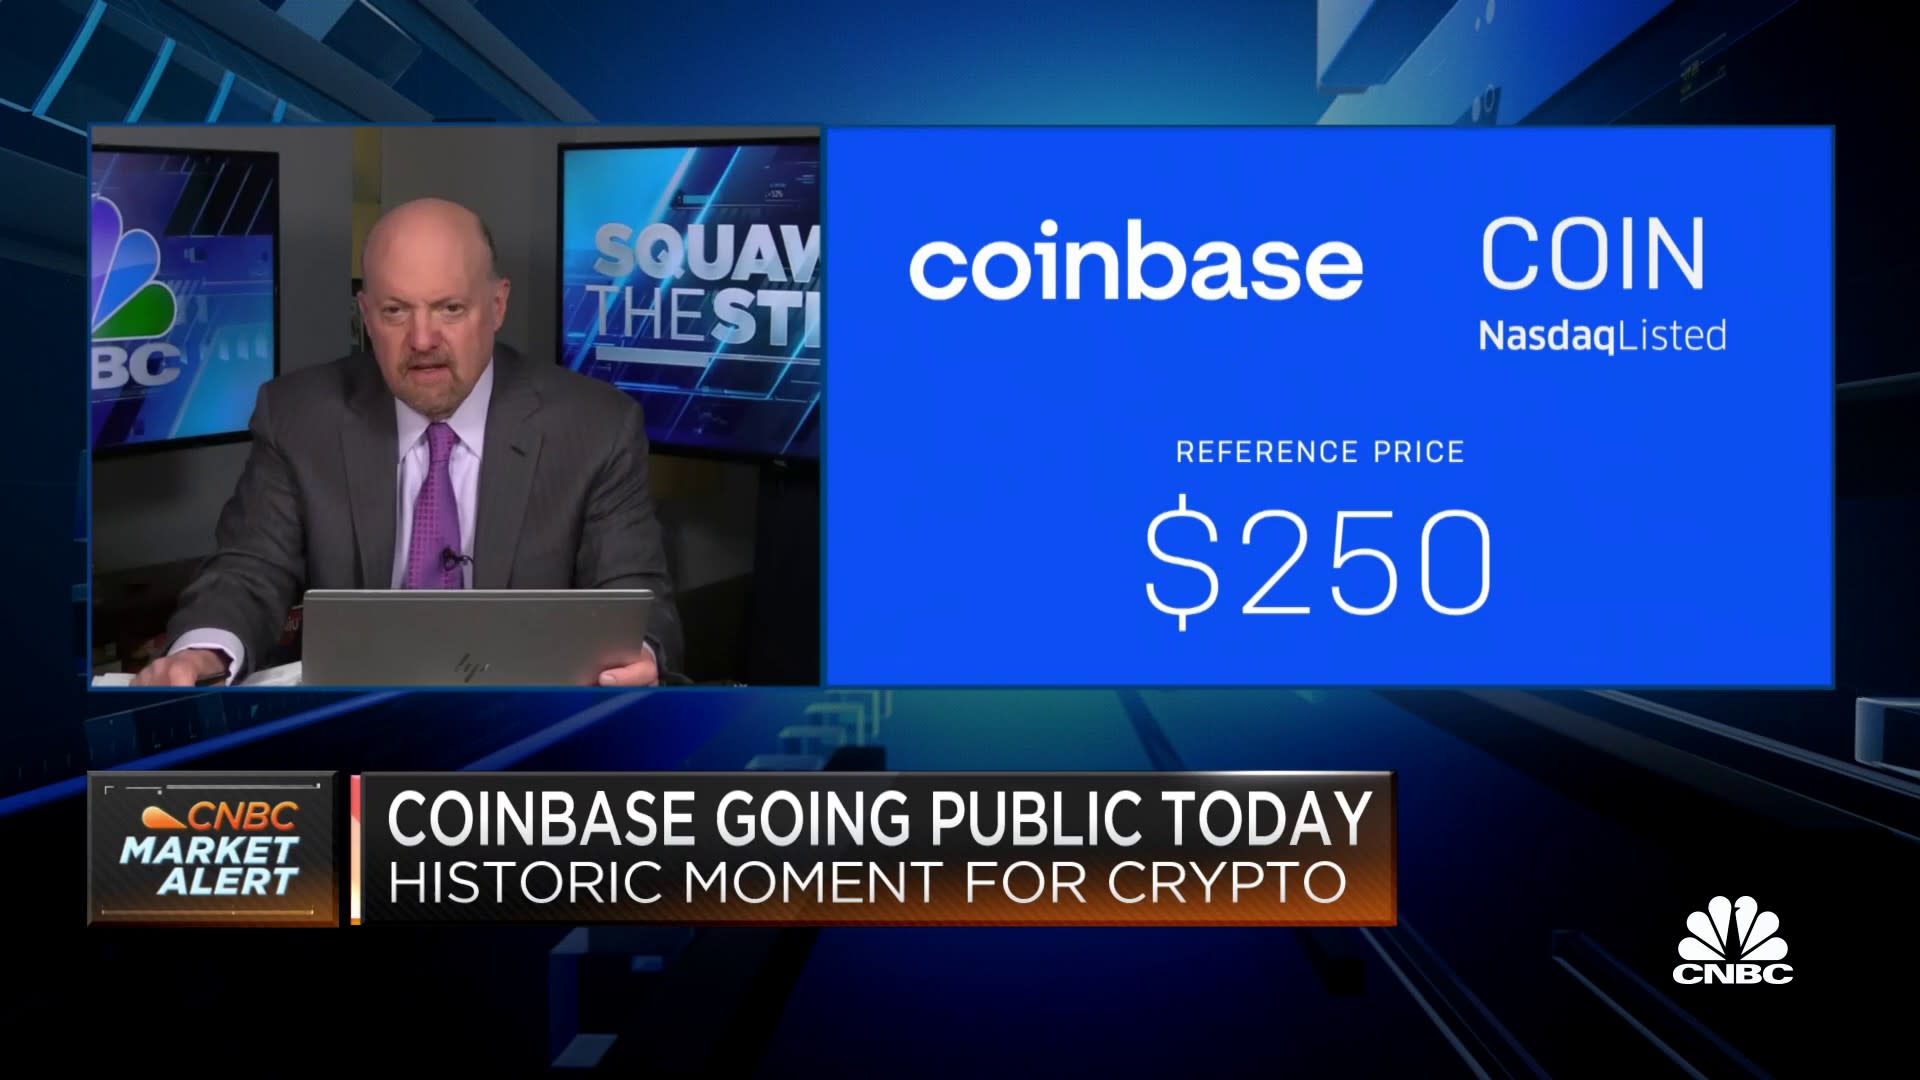 How To Buy Coinbase Ipo In Canada / The Coinbase IPO and ...